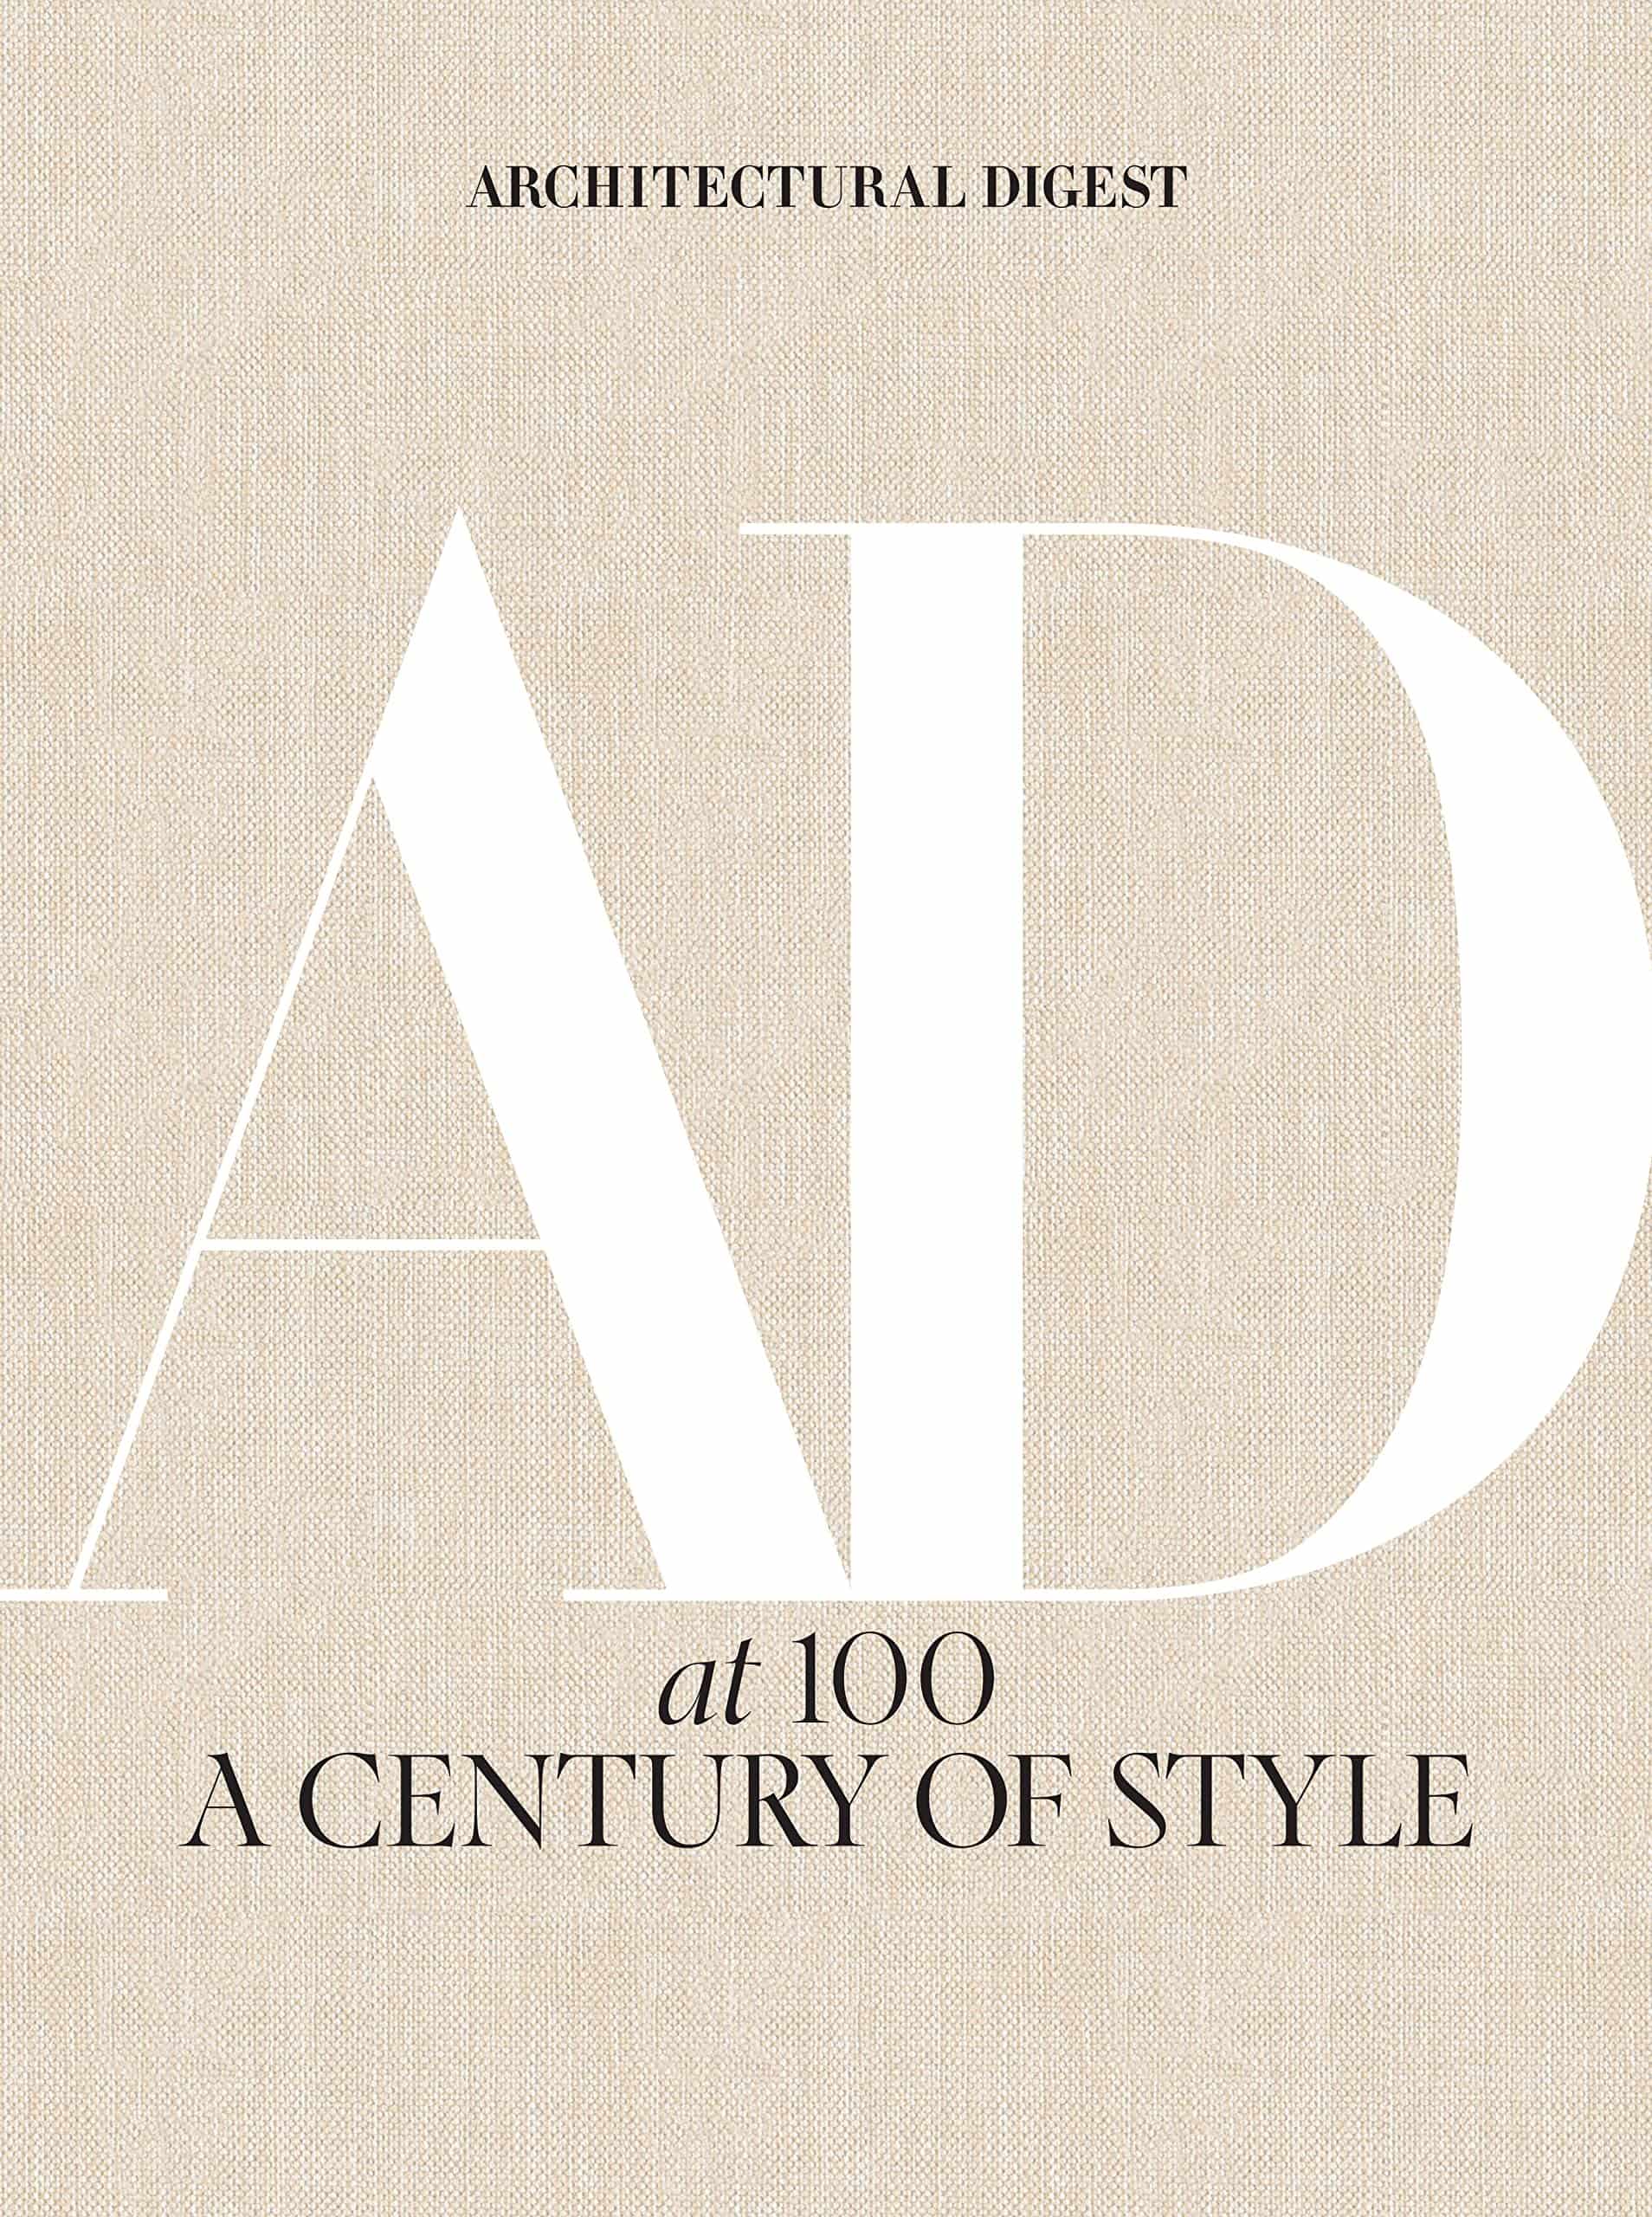 Architectural Digest at 100: A Century of Style by the editors of Architectural Digest